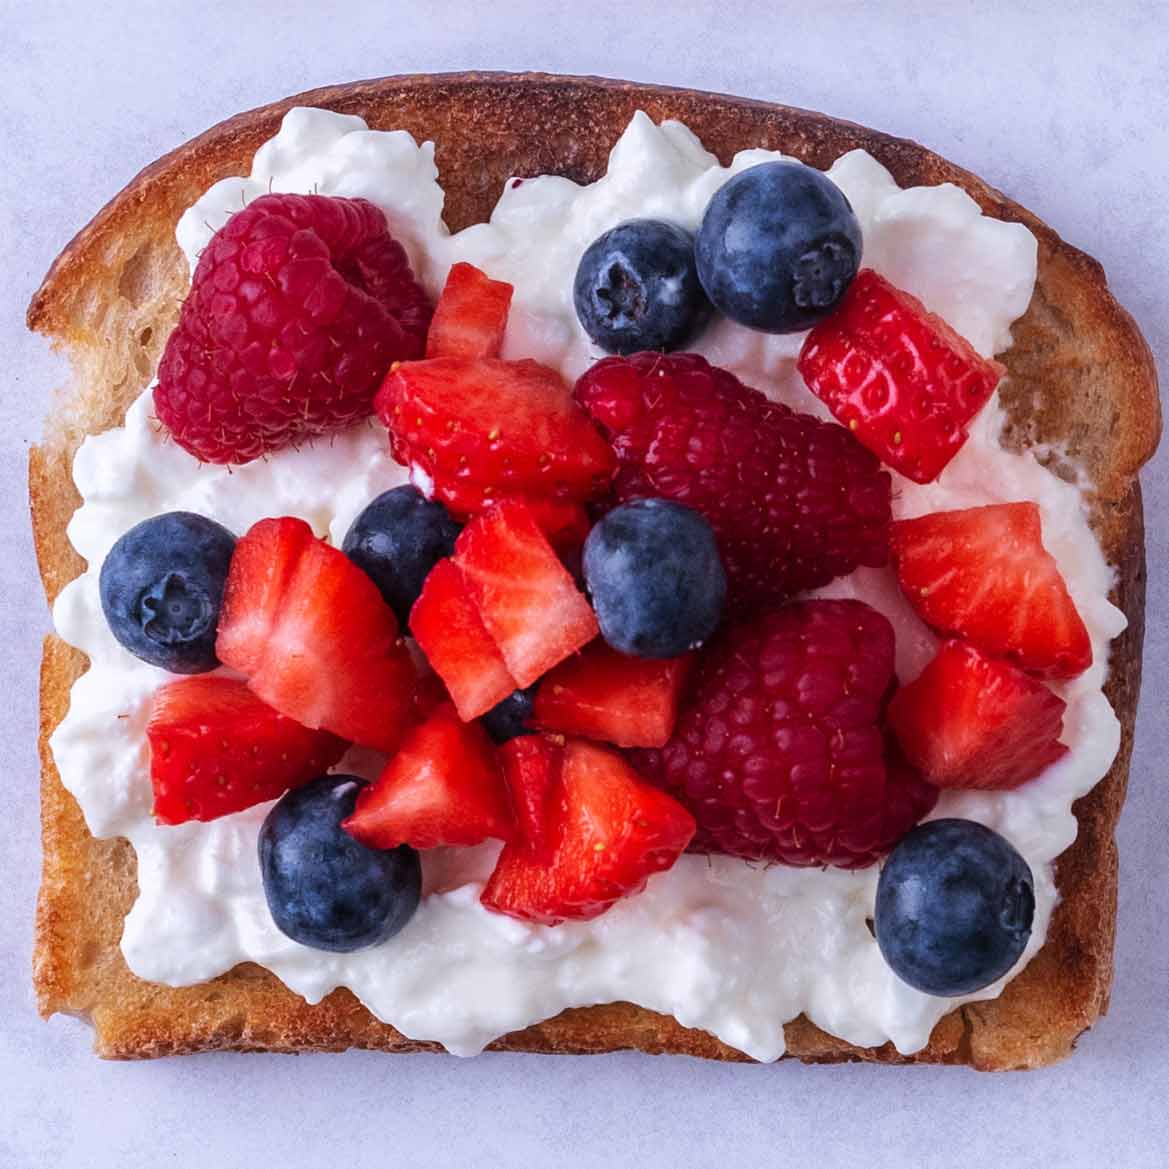 Sliced strawberries, raspberries and blueberries on top of cottage cheese on toast.